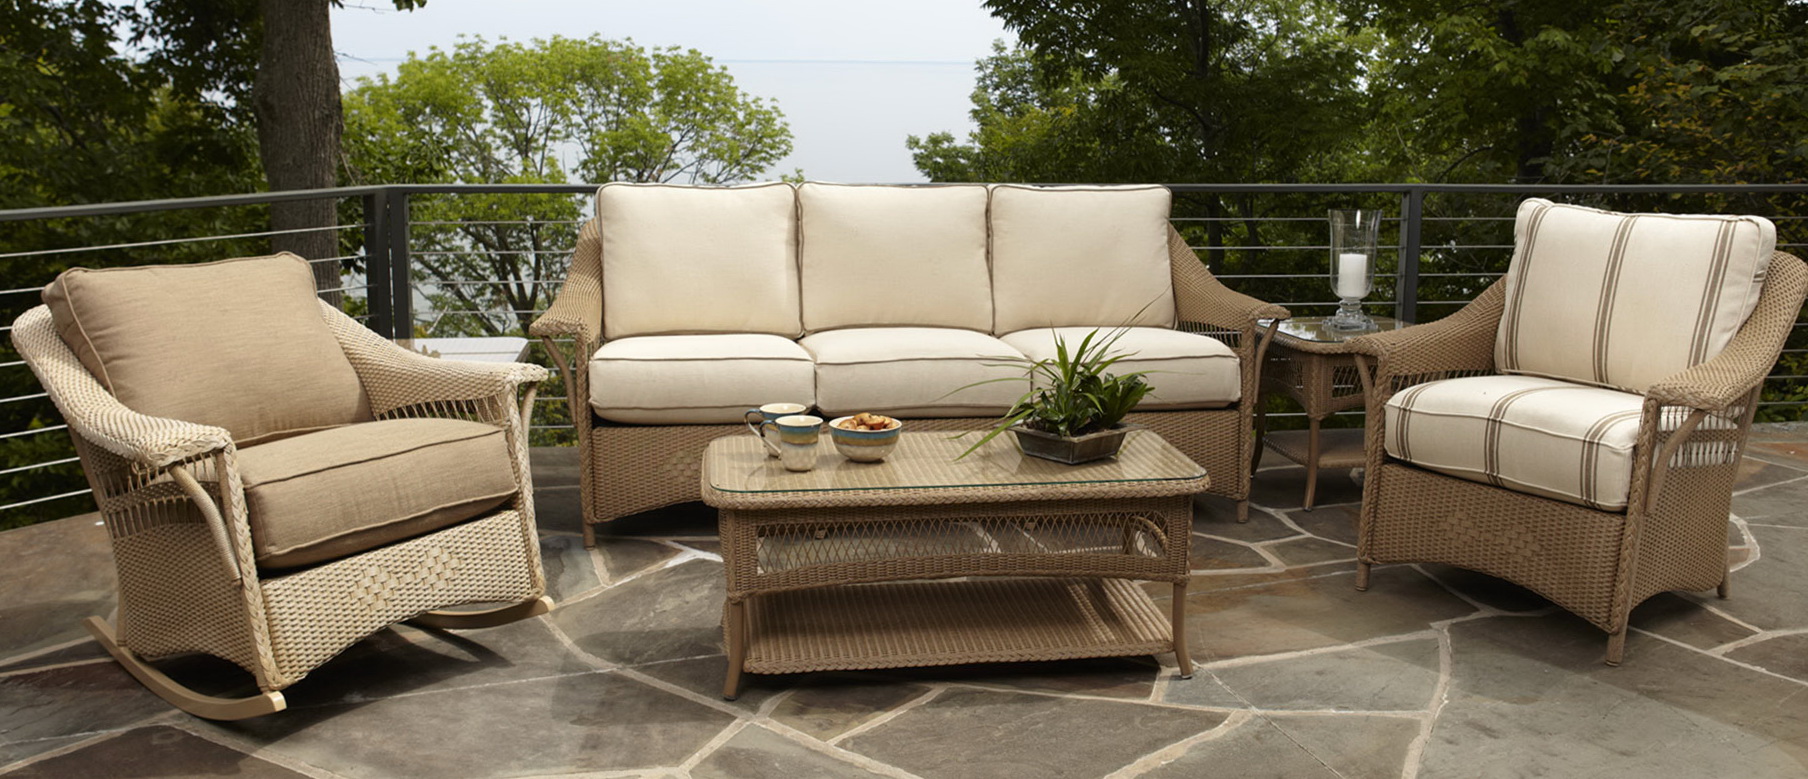 Wicker Patio Furniture Cushions Replacement | Home Design Ideas